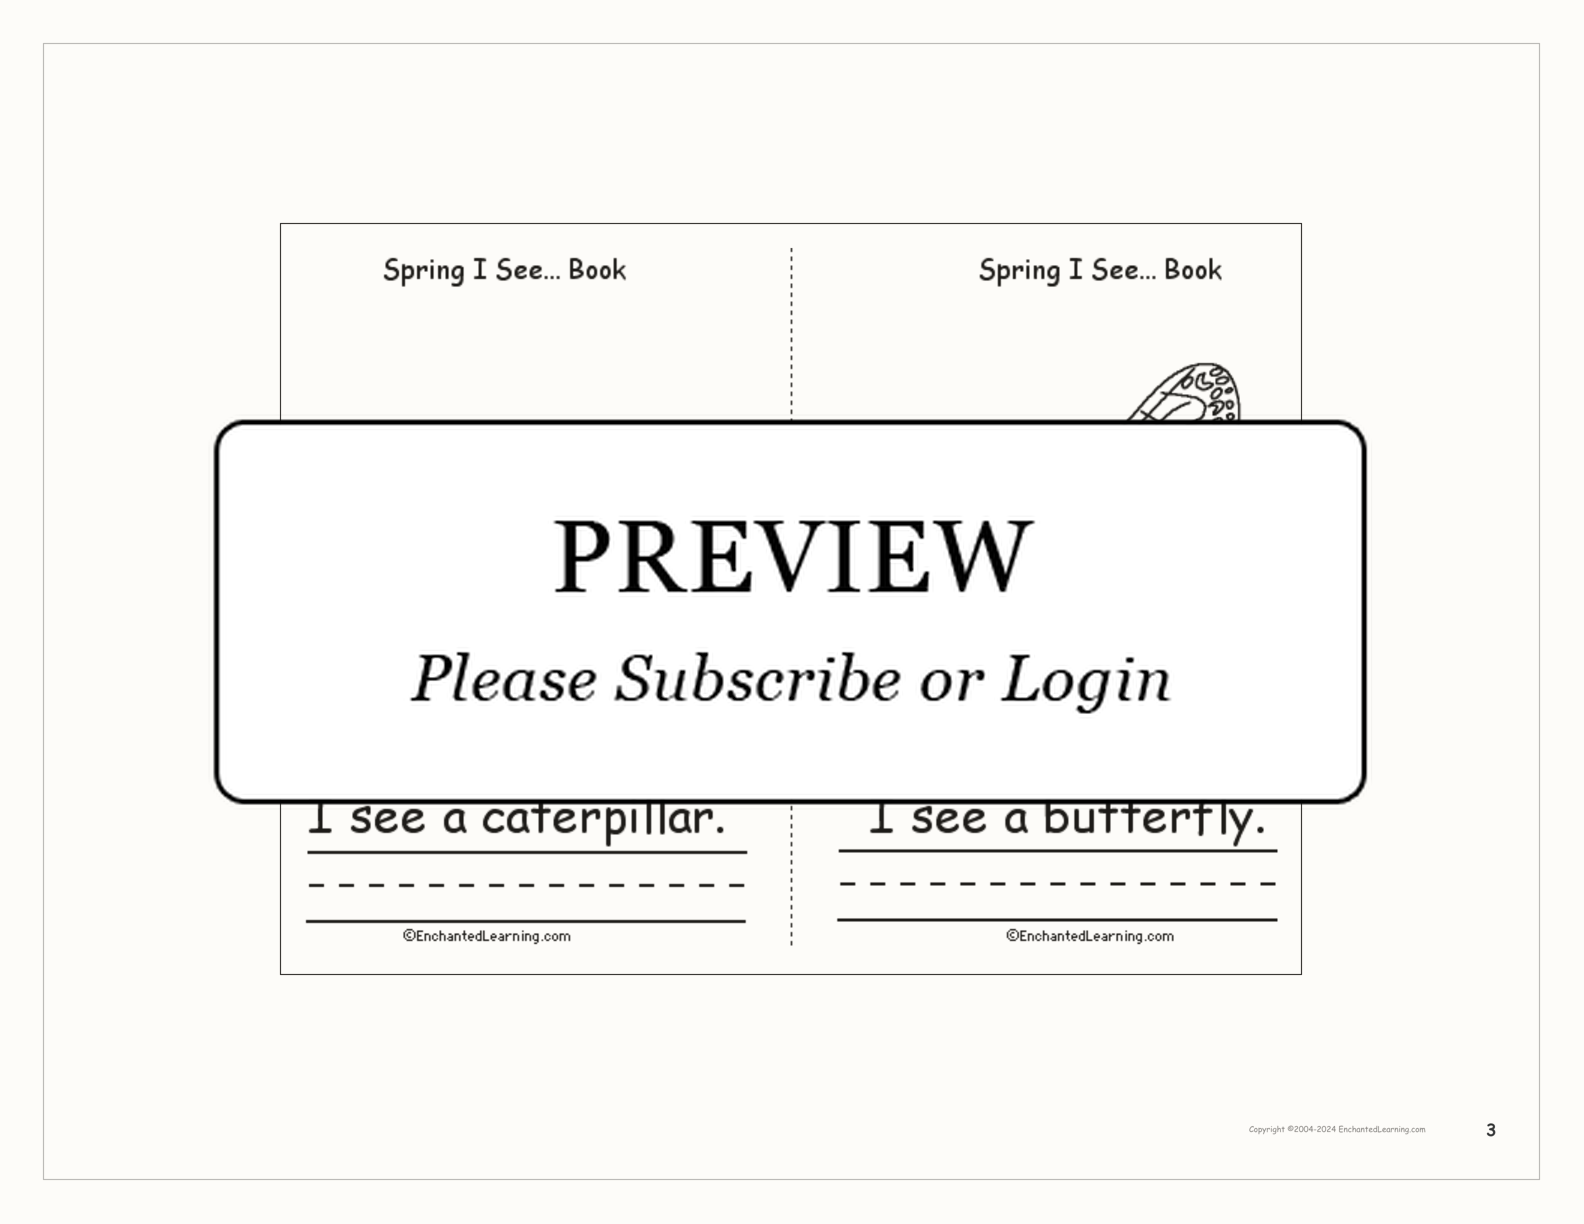 Spring I See... A Printable Book interactive worksheet page 3